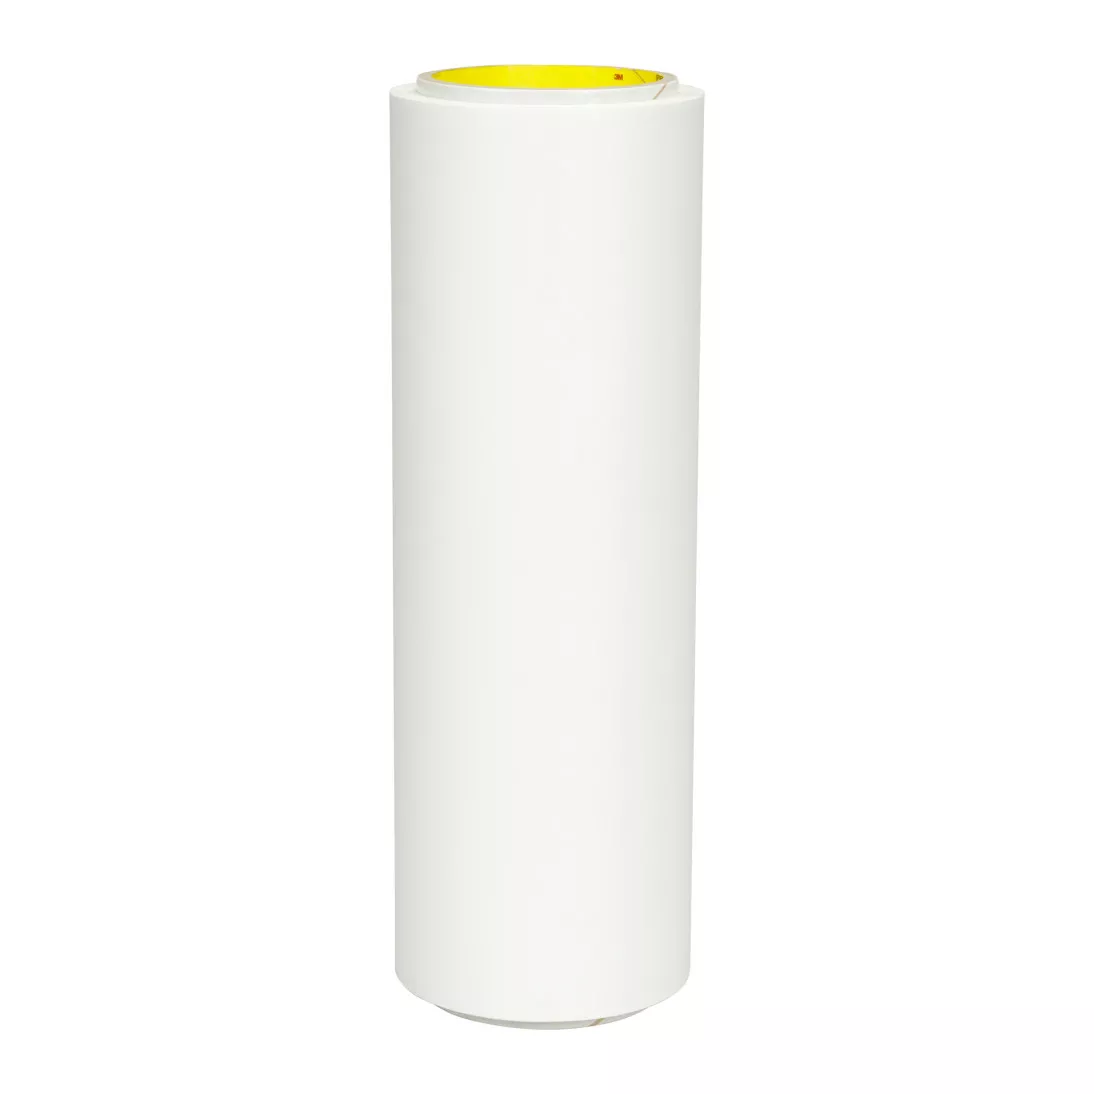 3M™ Adhesive Transfer Tape 9774WL, Clear, 60 in x 60 yd, 4 mil, 1 roll
per case